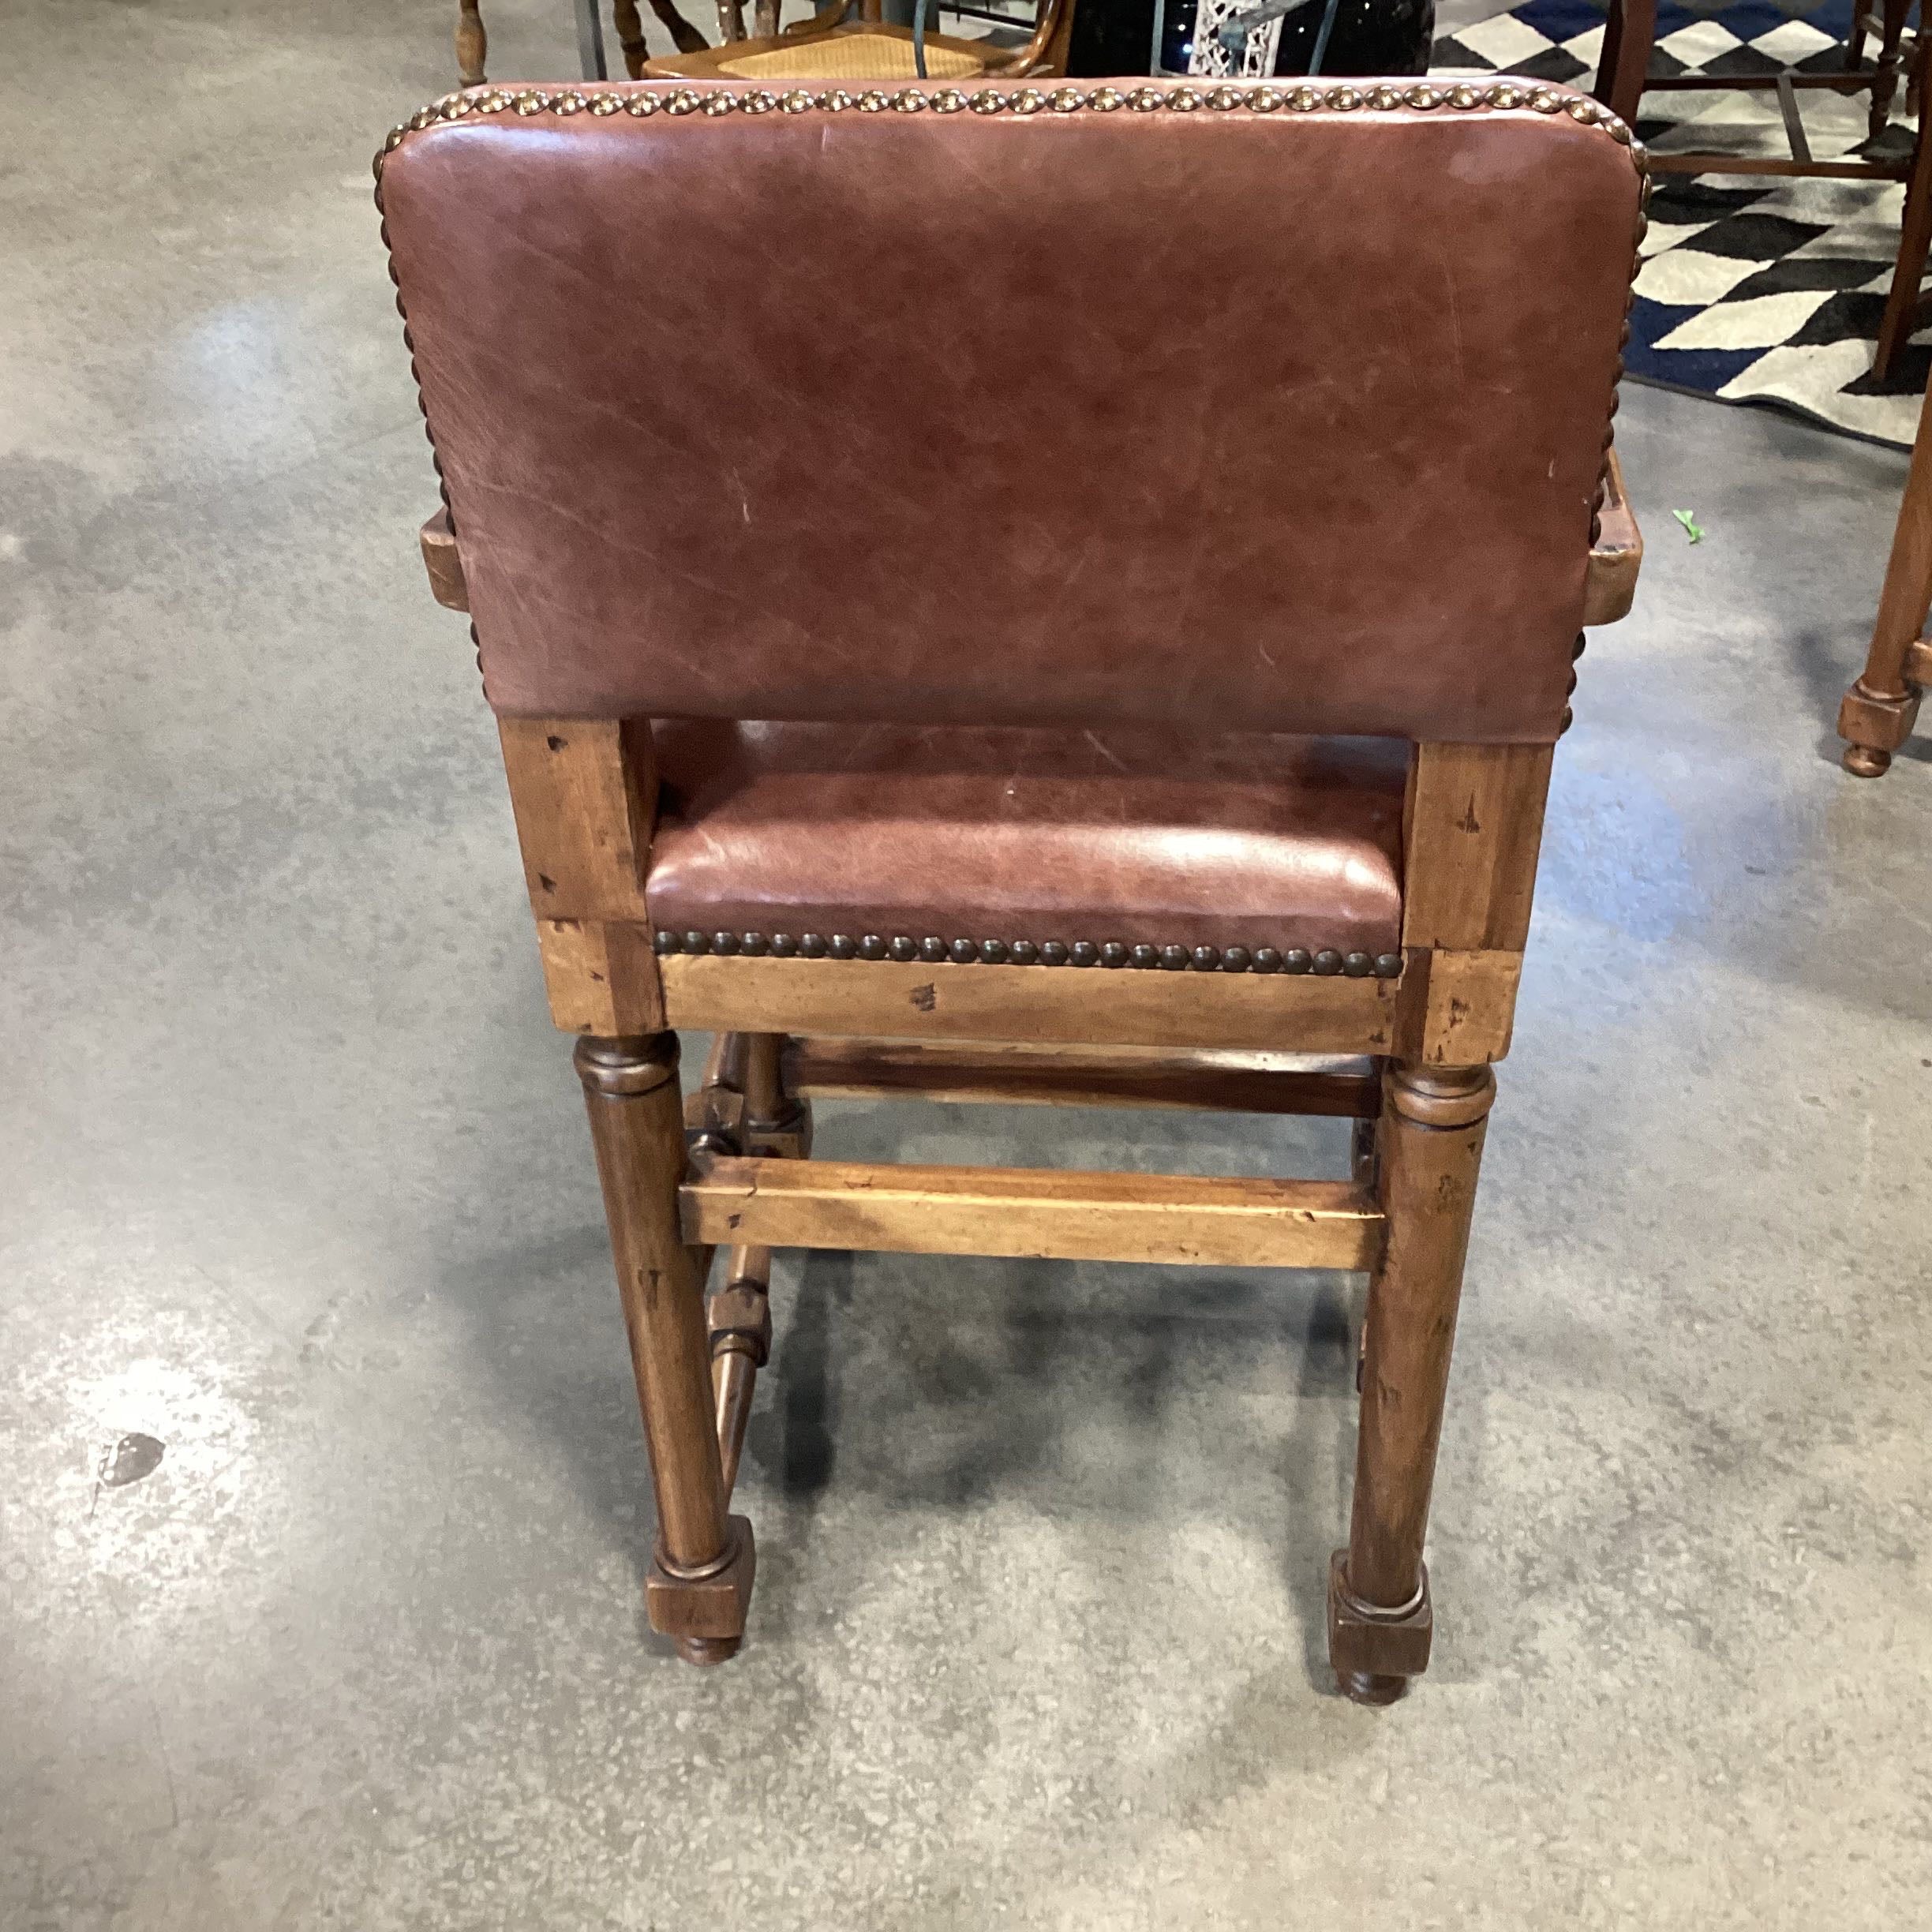 Solid Wood Leather with Nailhead Accents Barstool